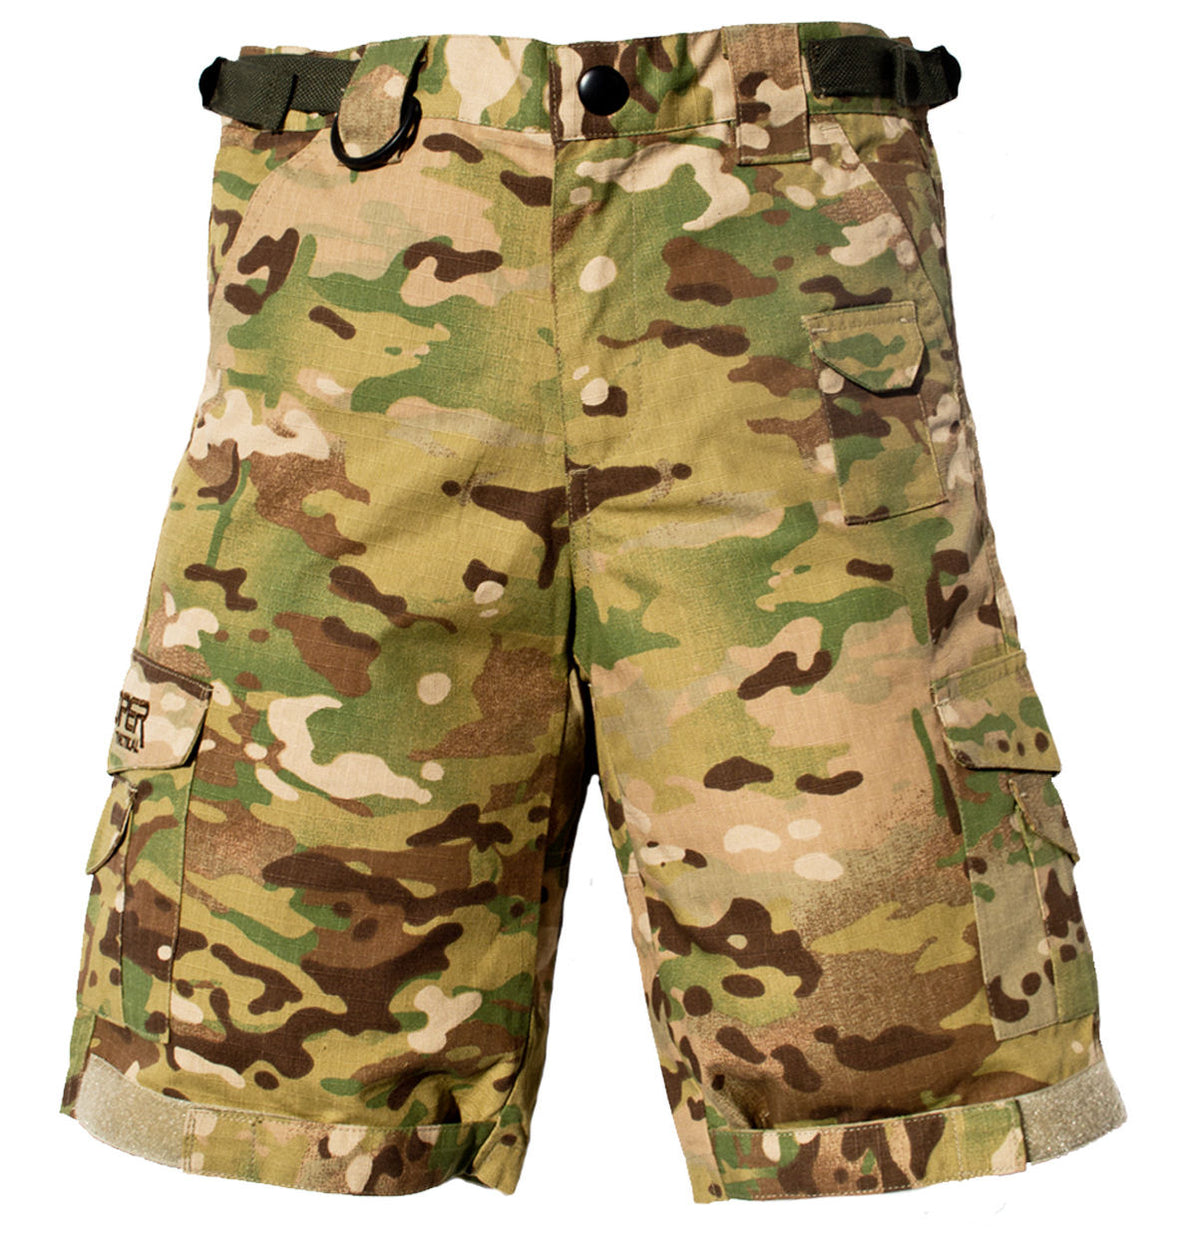 Trooper Clothing Kids Tactical Shorts